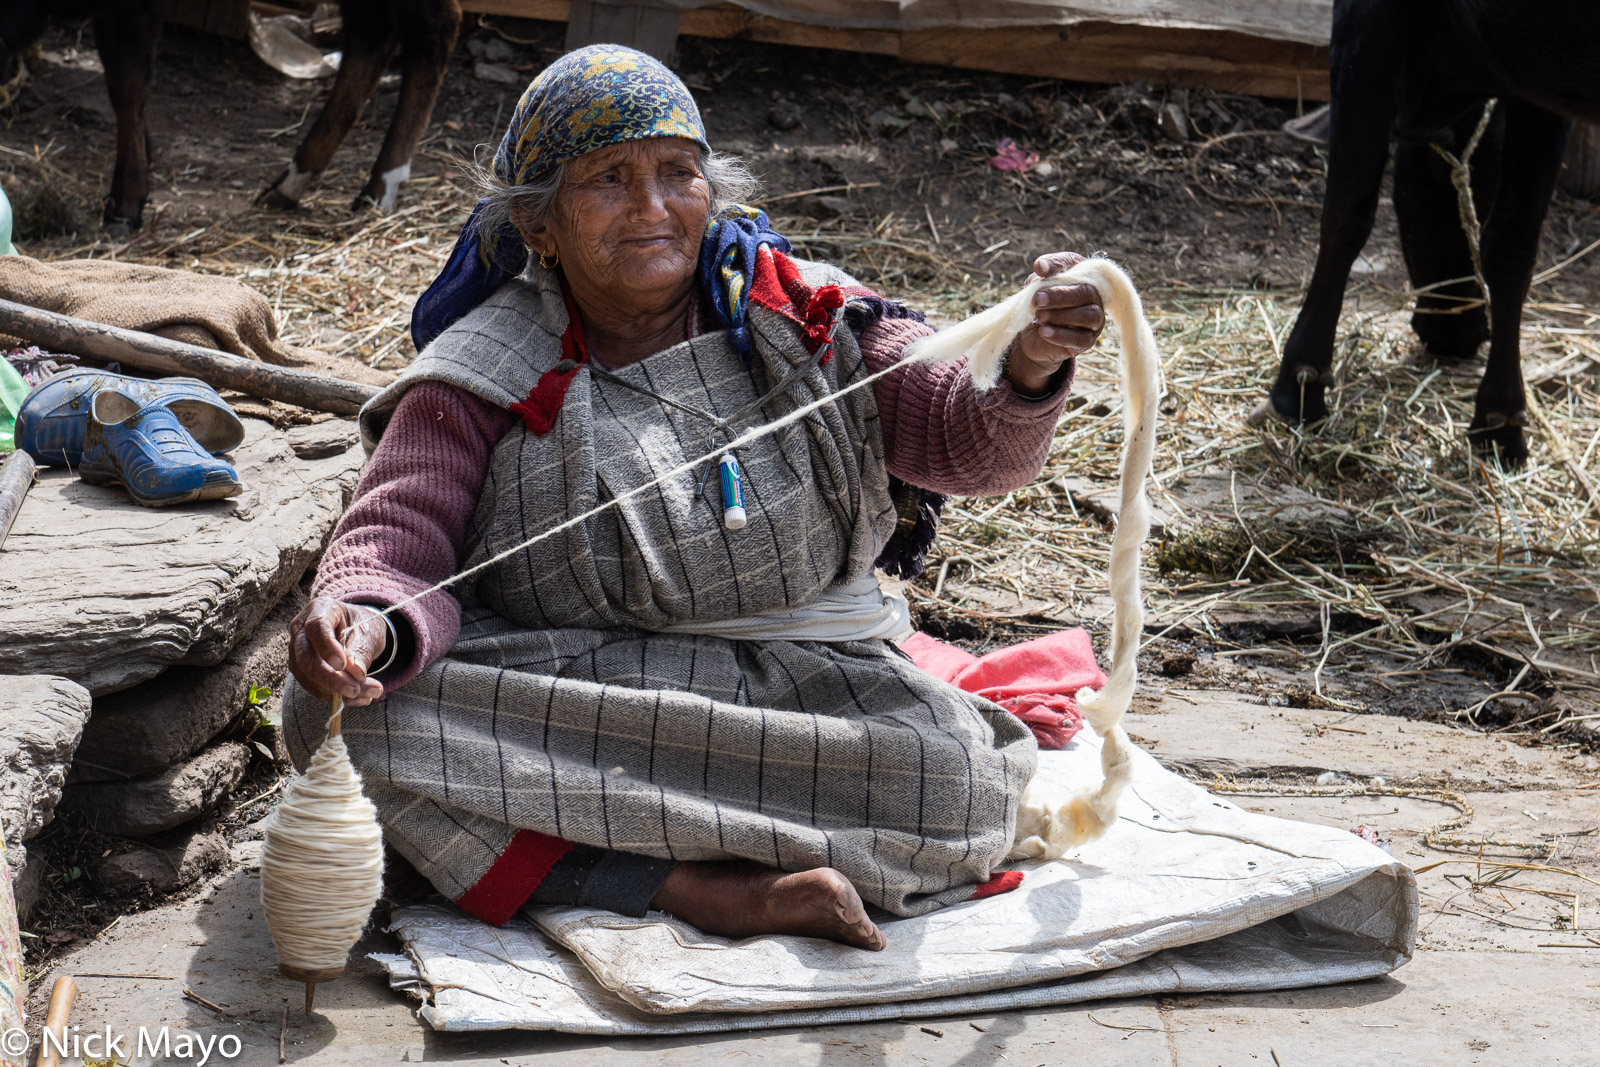 A Kulu woman spinning wool on a hand held spindle in the village of Rumsu.